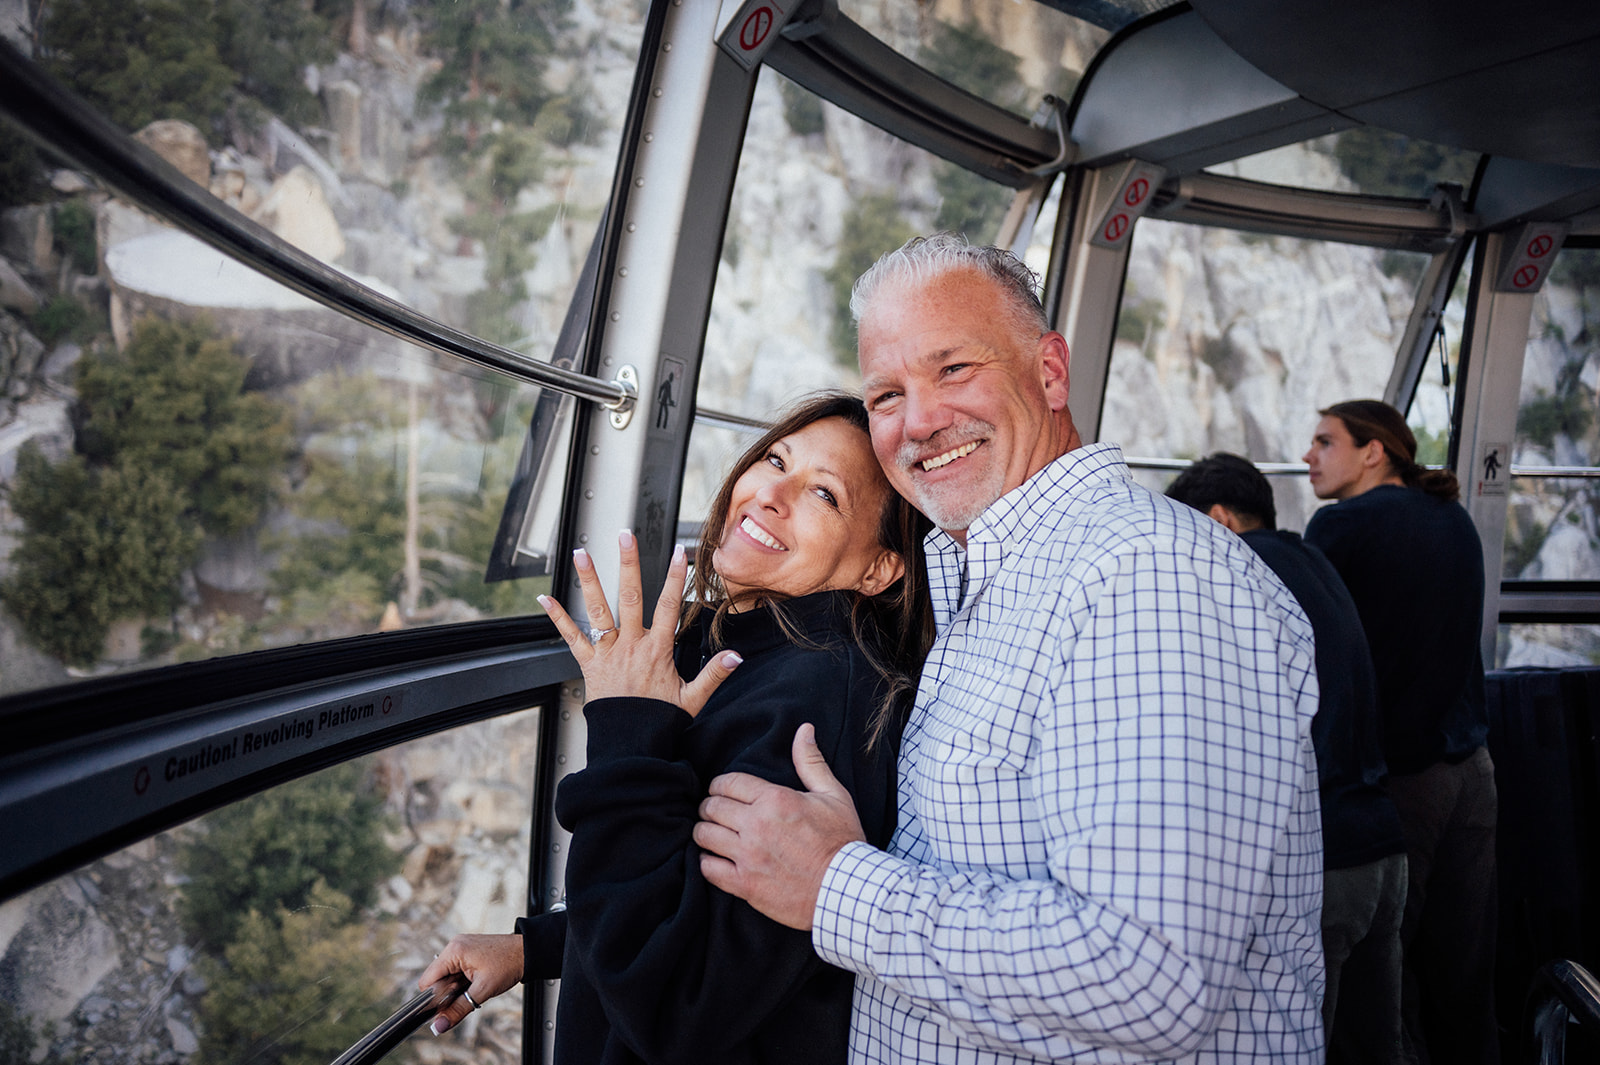 Woman showing off engagement ring with man hugging her in Tram on Mount San Jacinto near Palm Springs California.